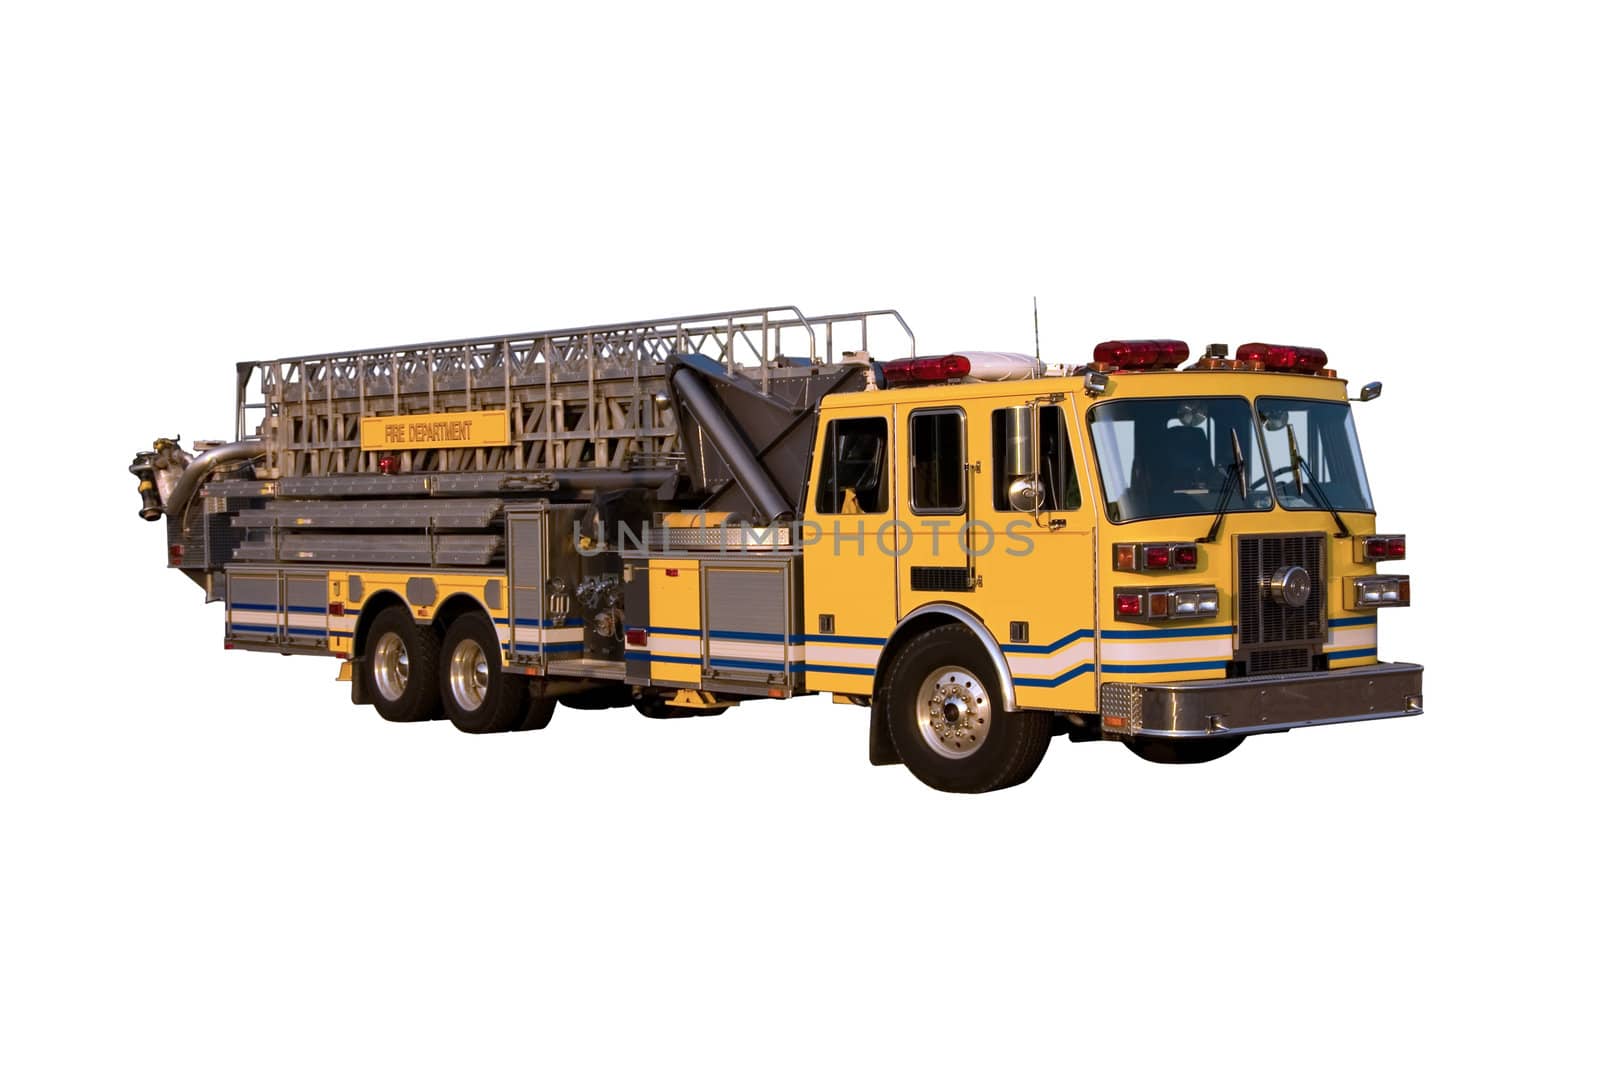 This is a front angle view of a fire truck with a ladder and bucket isolated on a white background.